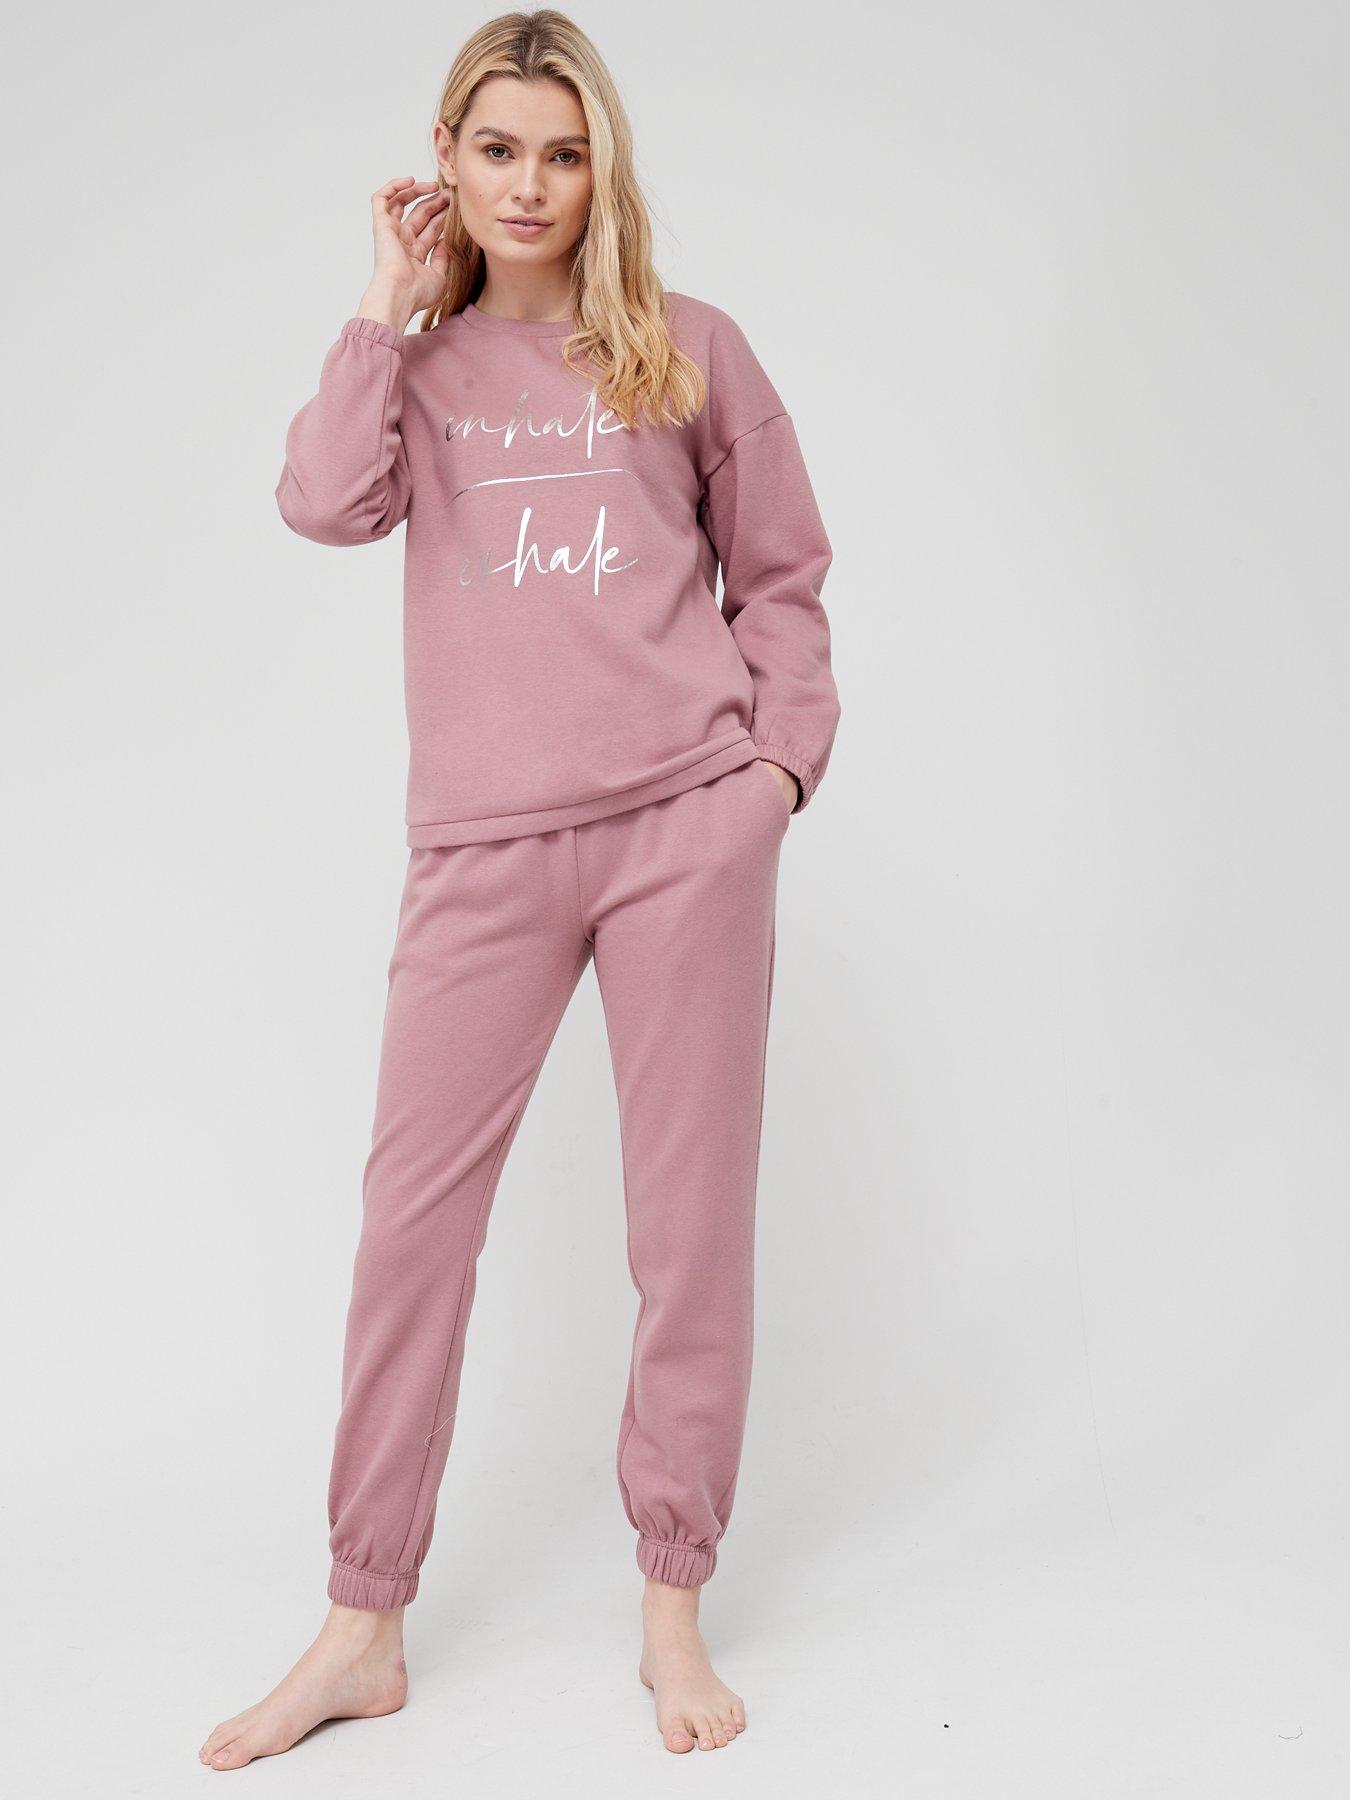  Inhale Exhale Sweat and Jogger Lounge Set - Blush